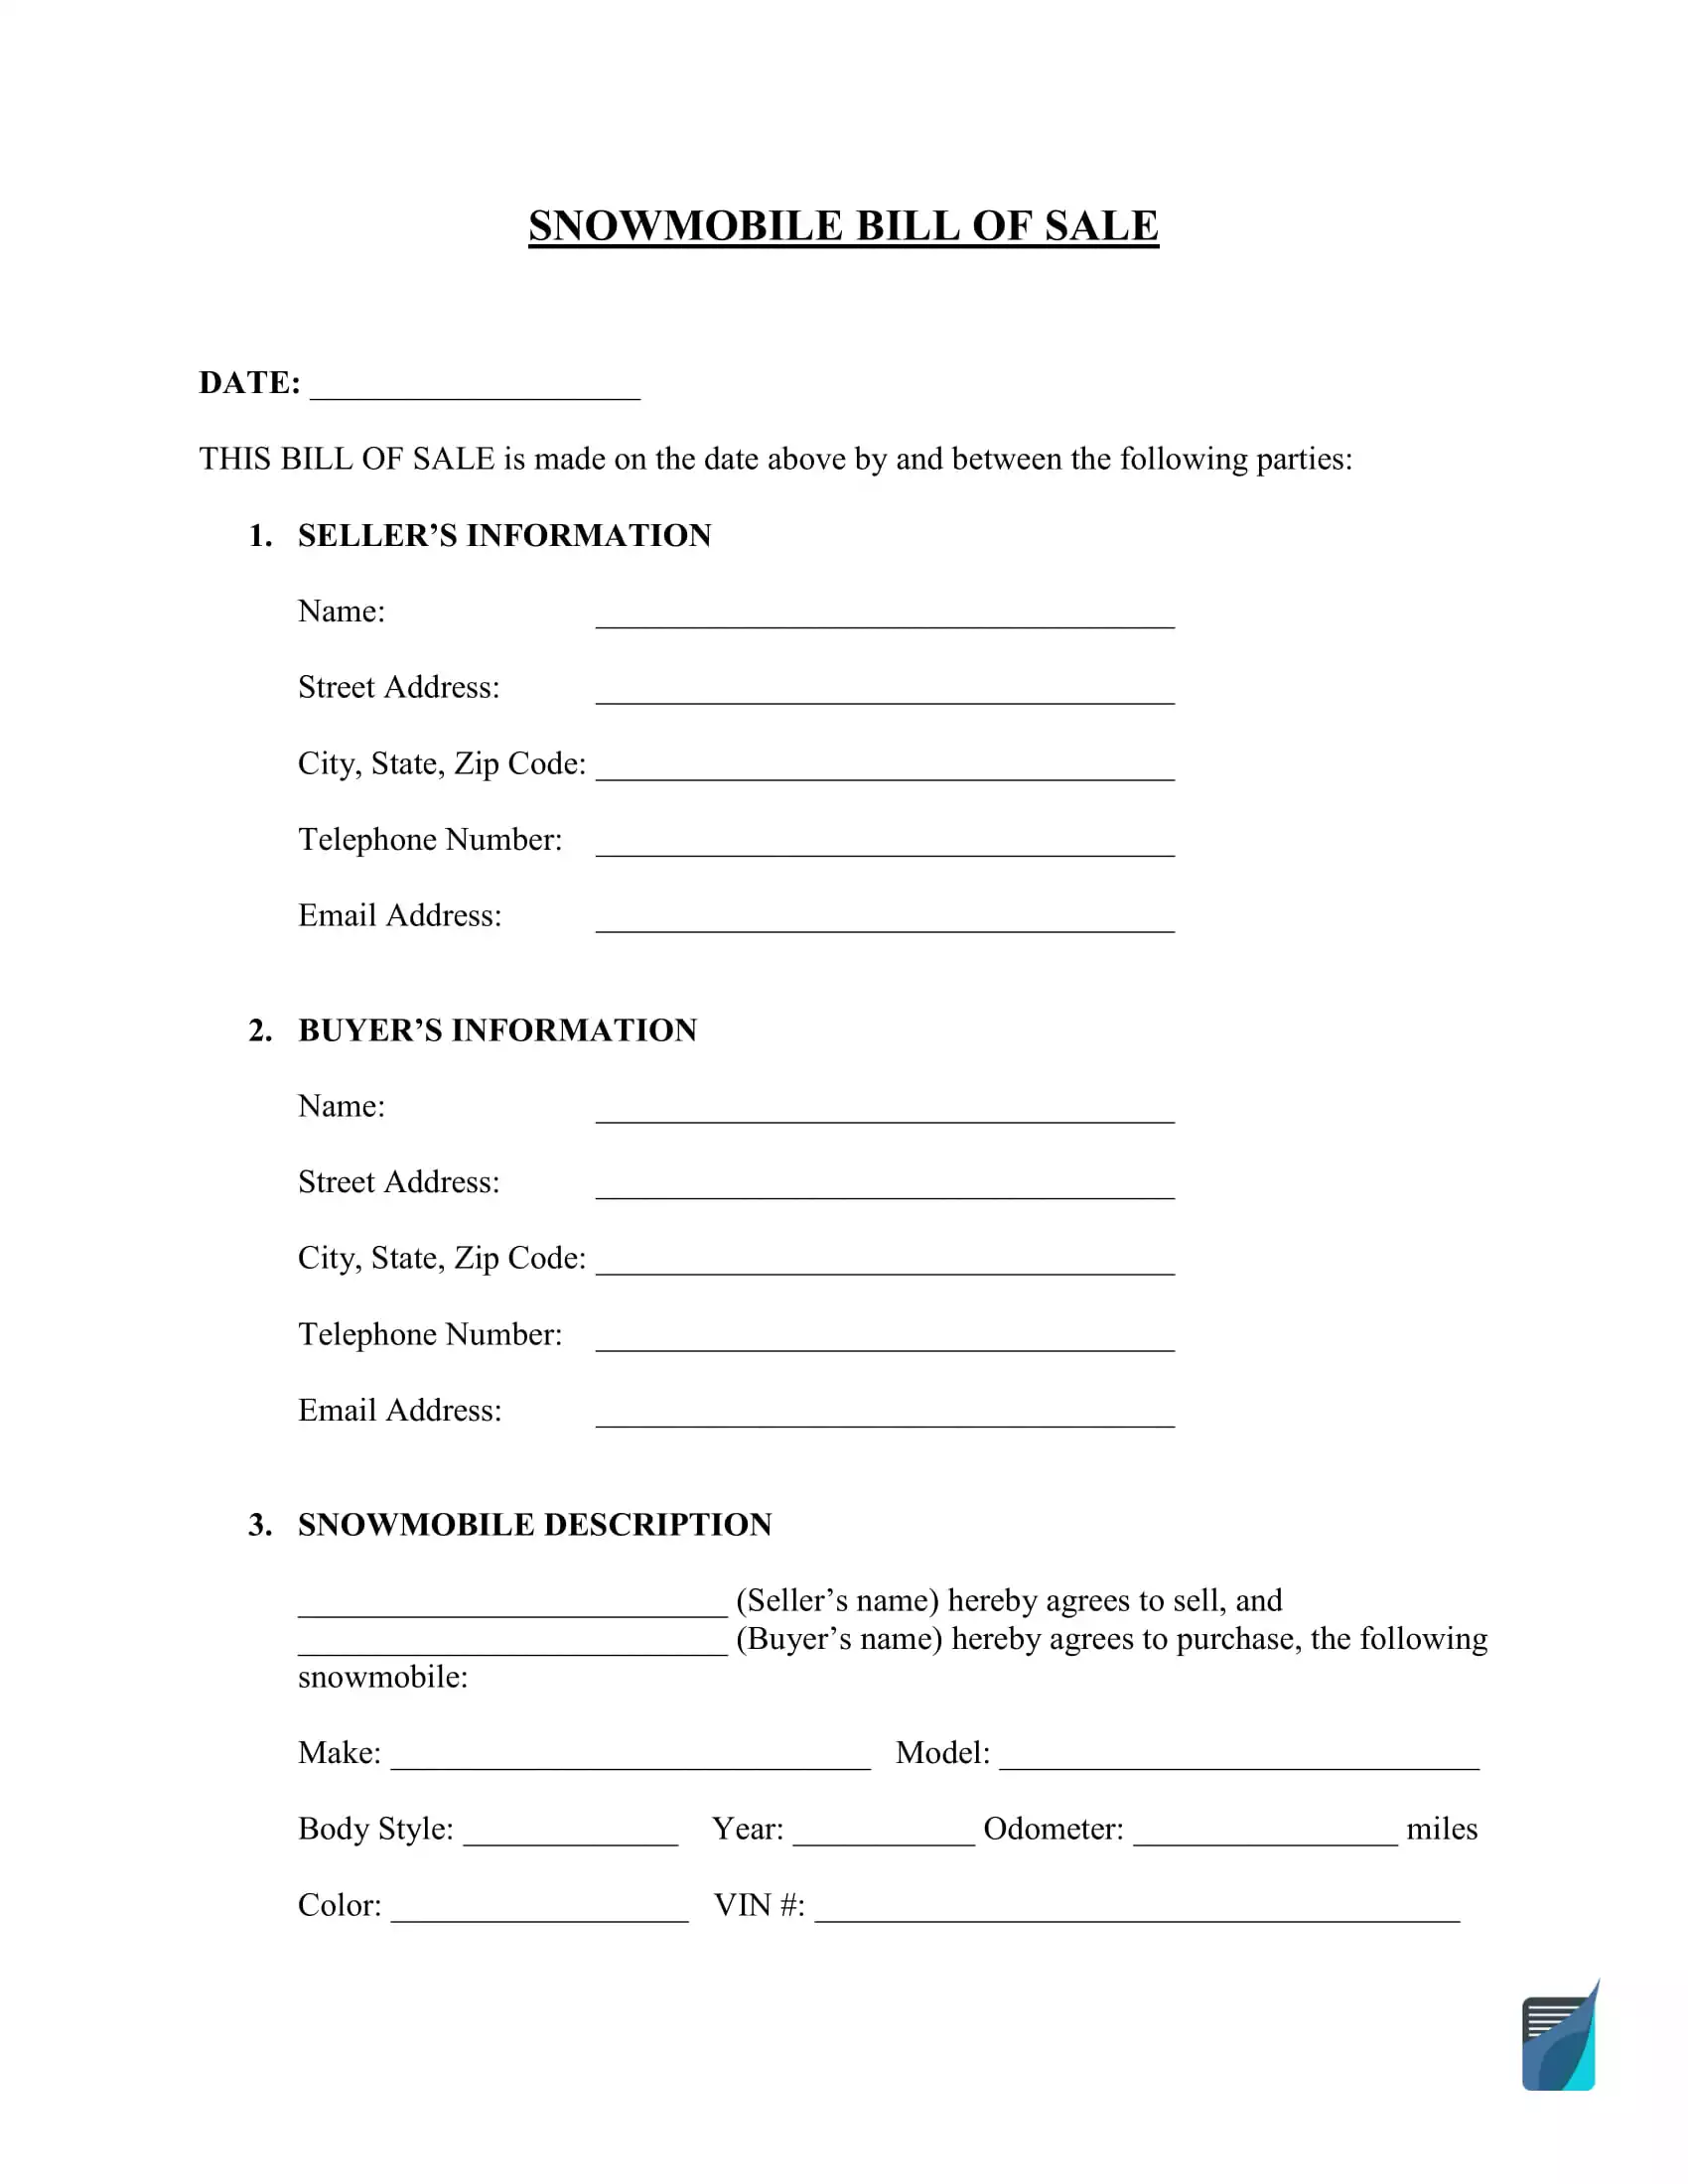 Free Snowmobile Bill Of Sale Form Template Formspal